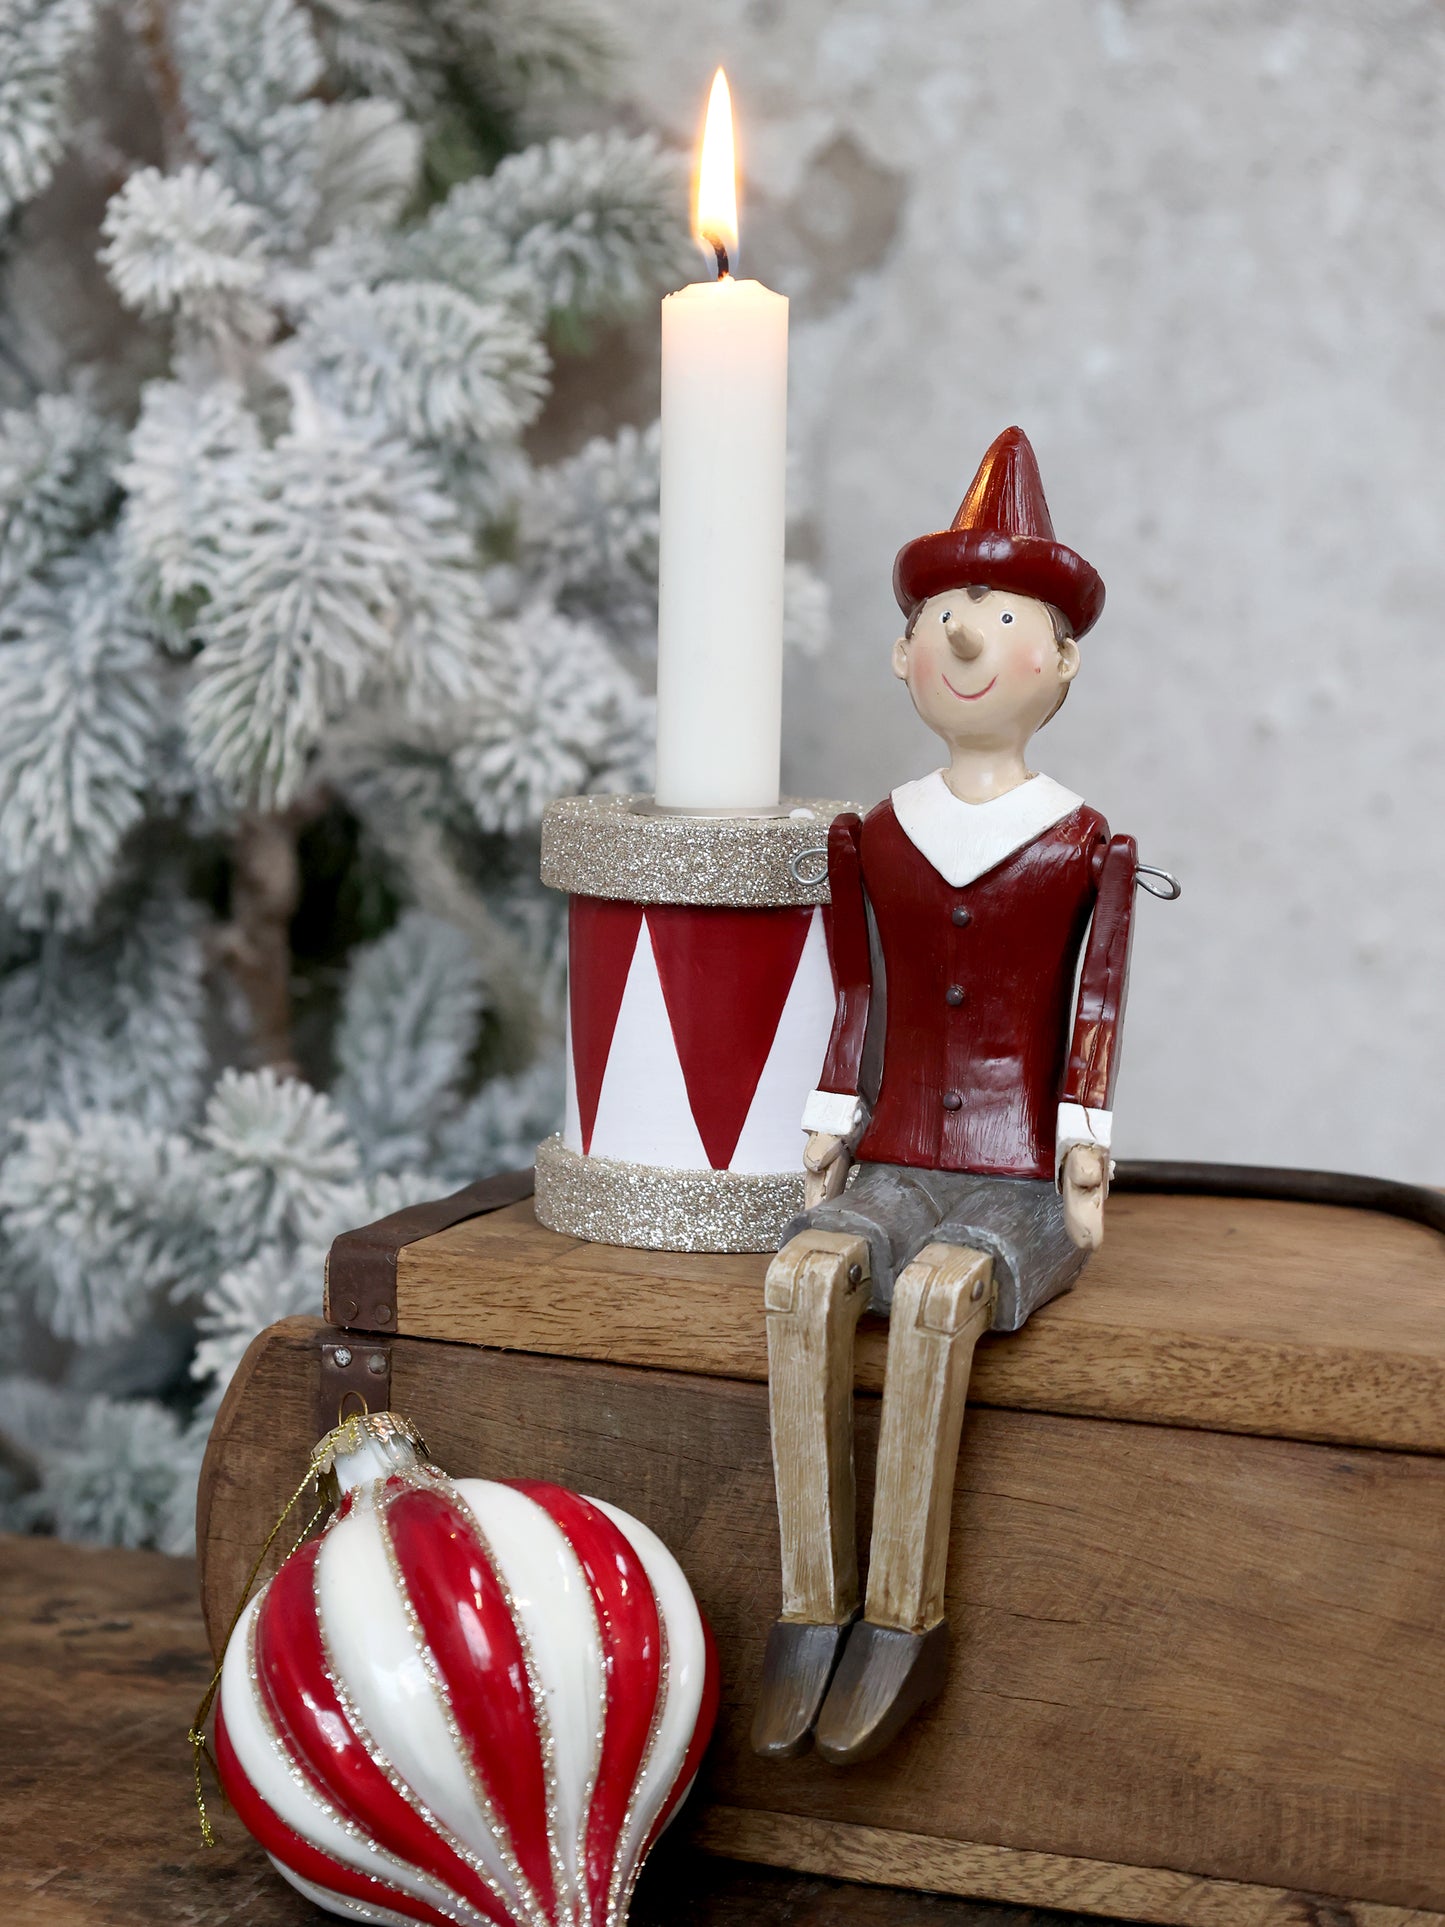 Striped Red & White Bauble